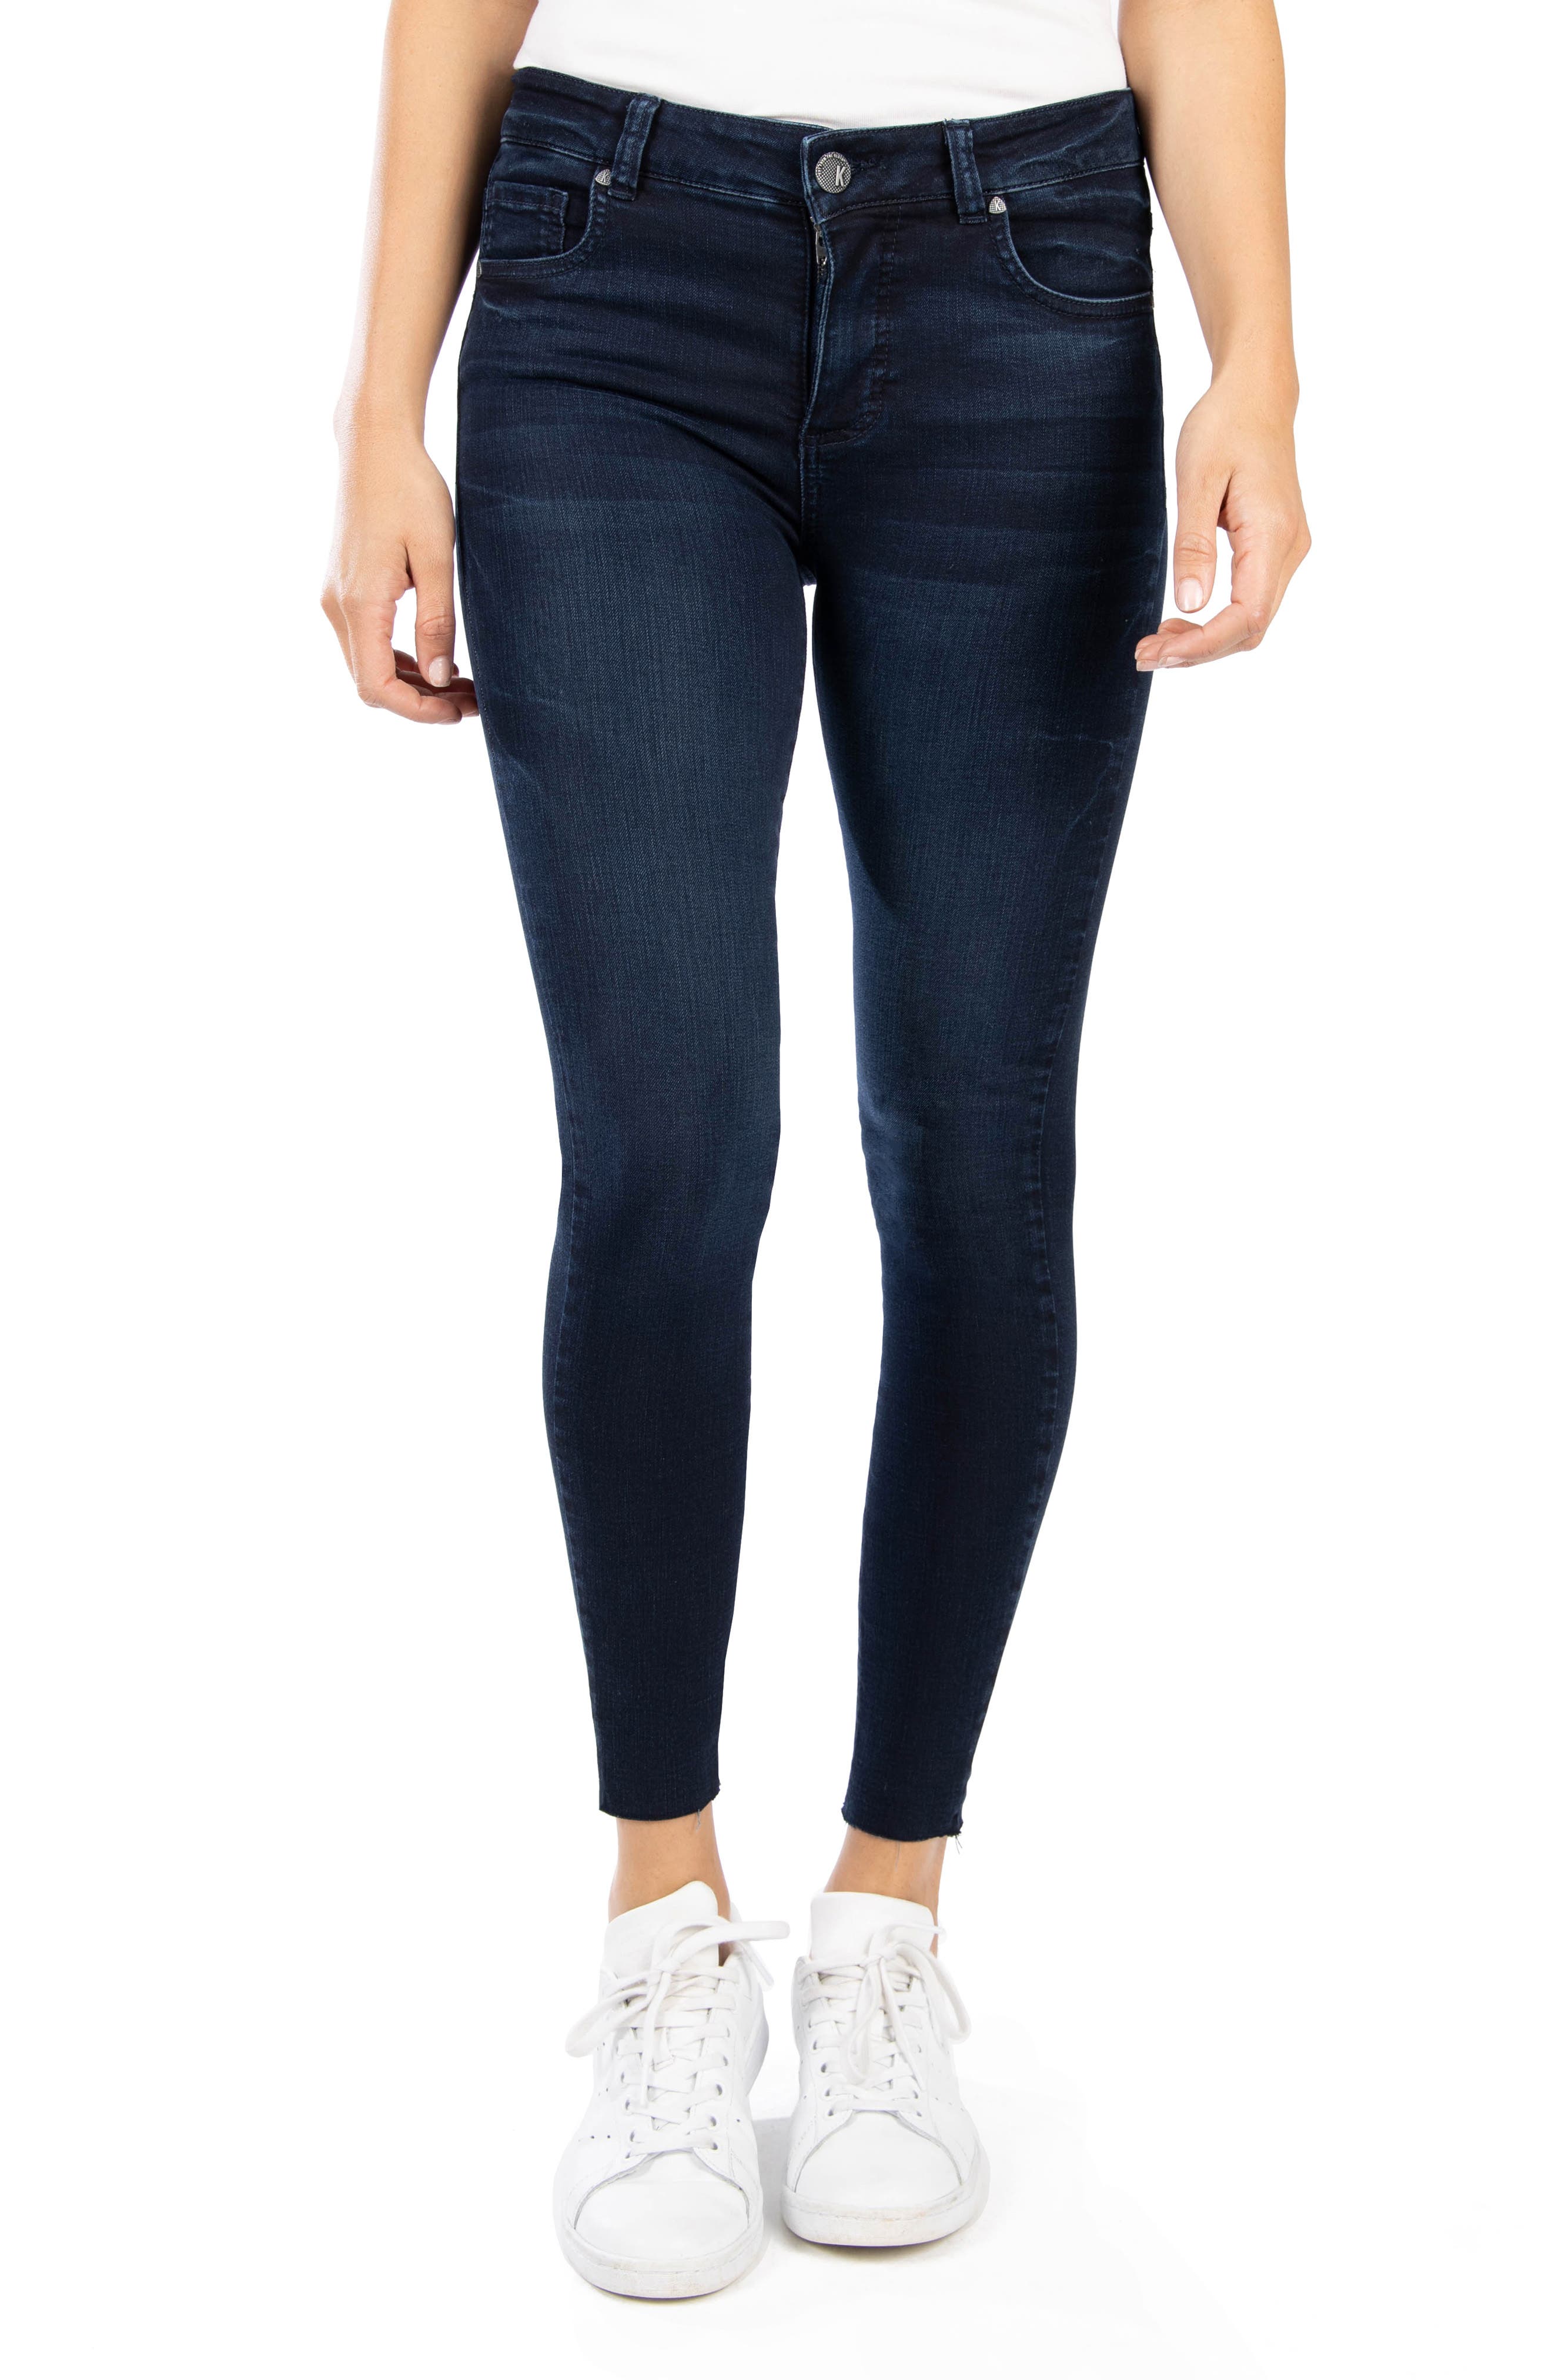 KUT from the Kloth | Connie High Rise Ankle Cut Jeans | Nordstrom Rack